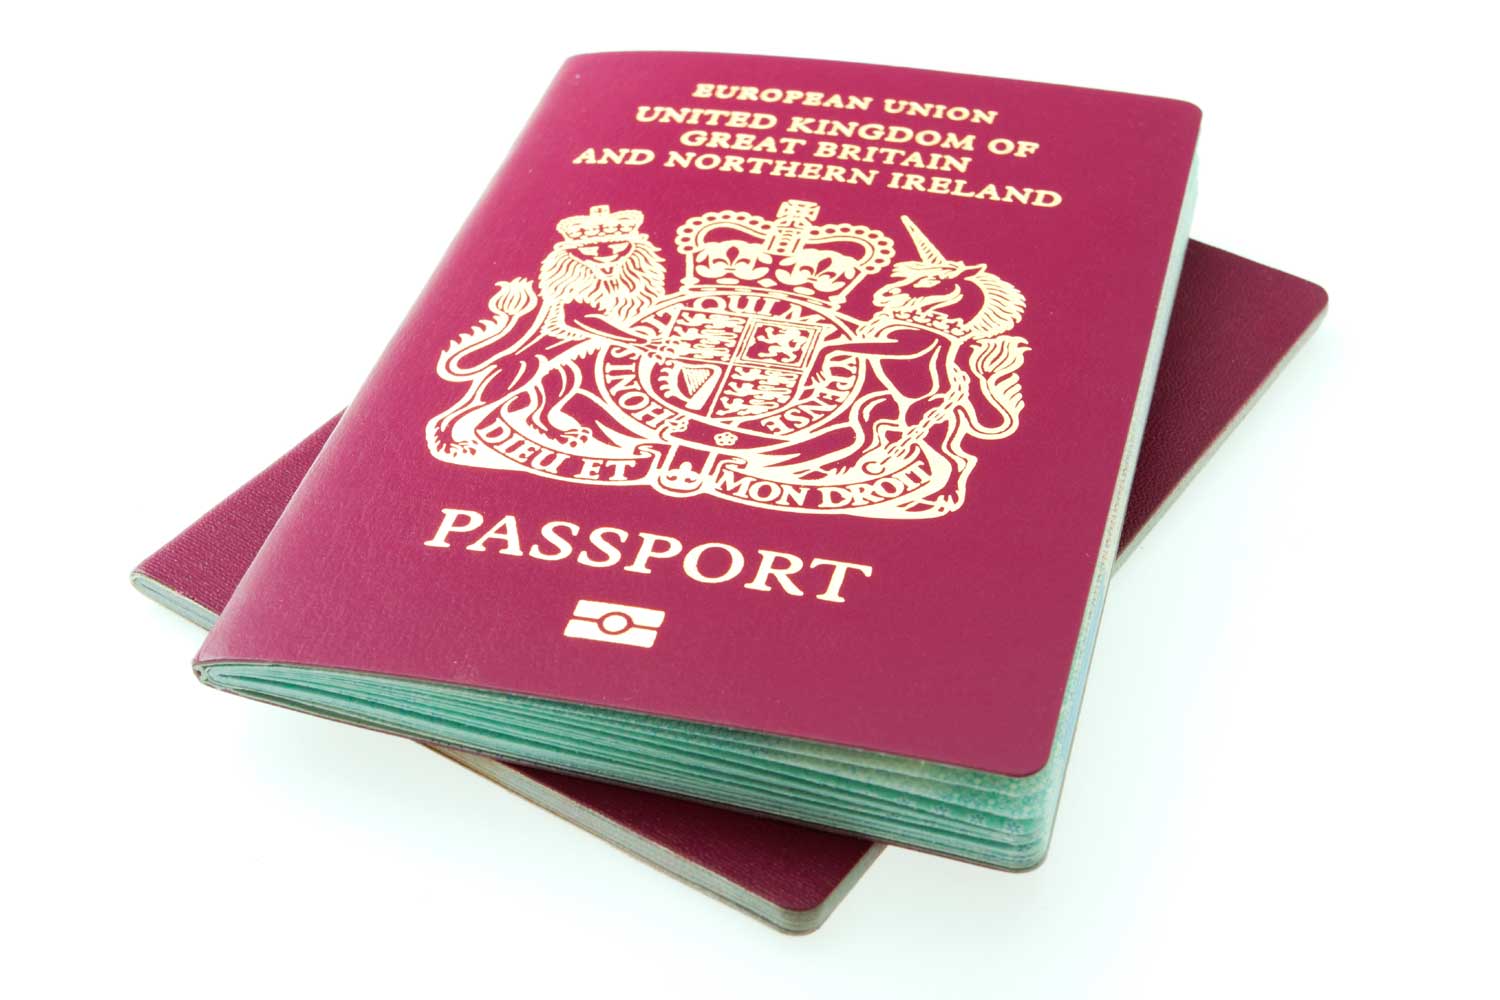 Landlords and letting agents face jail / Right to Rent could impact British citizens without passports